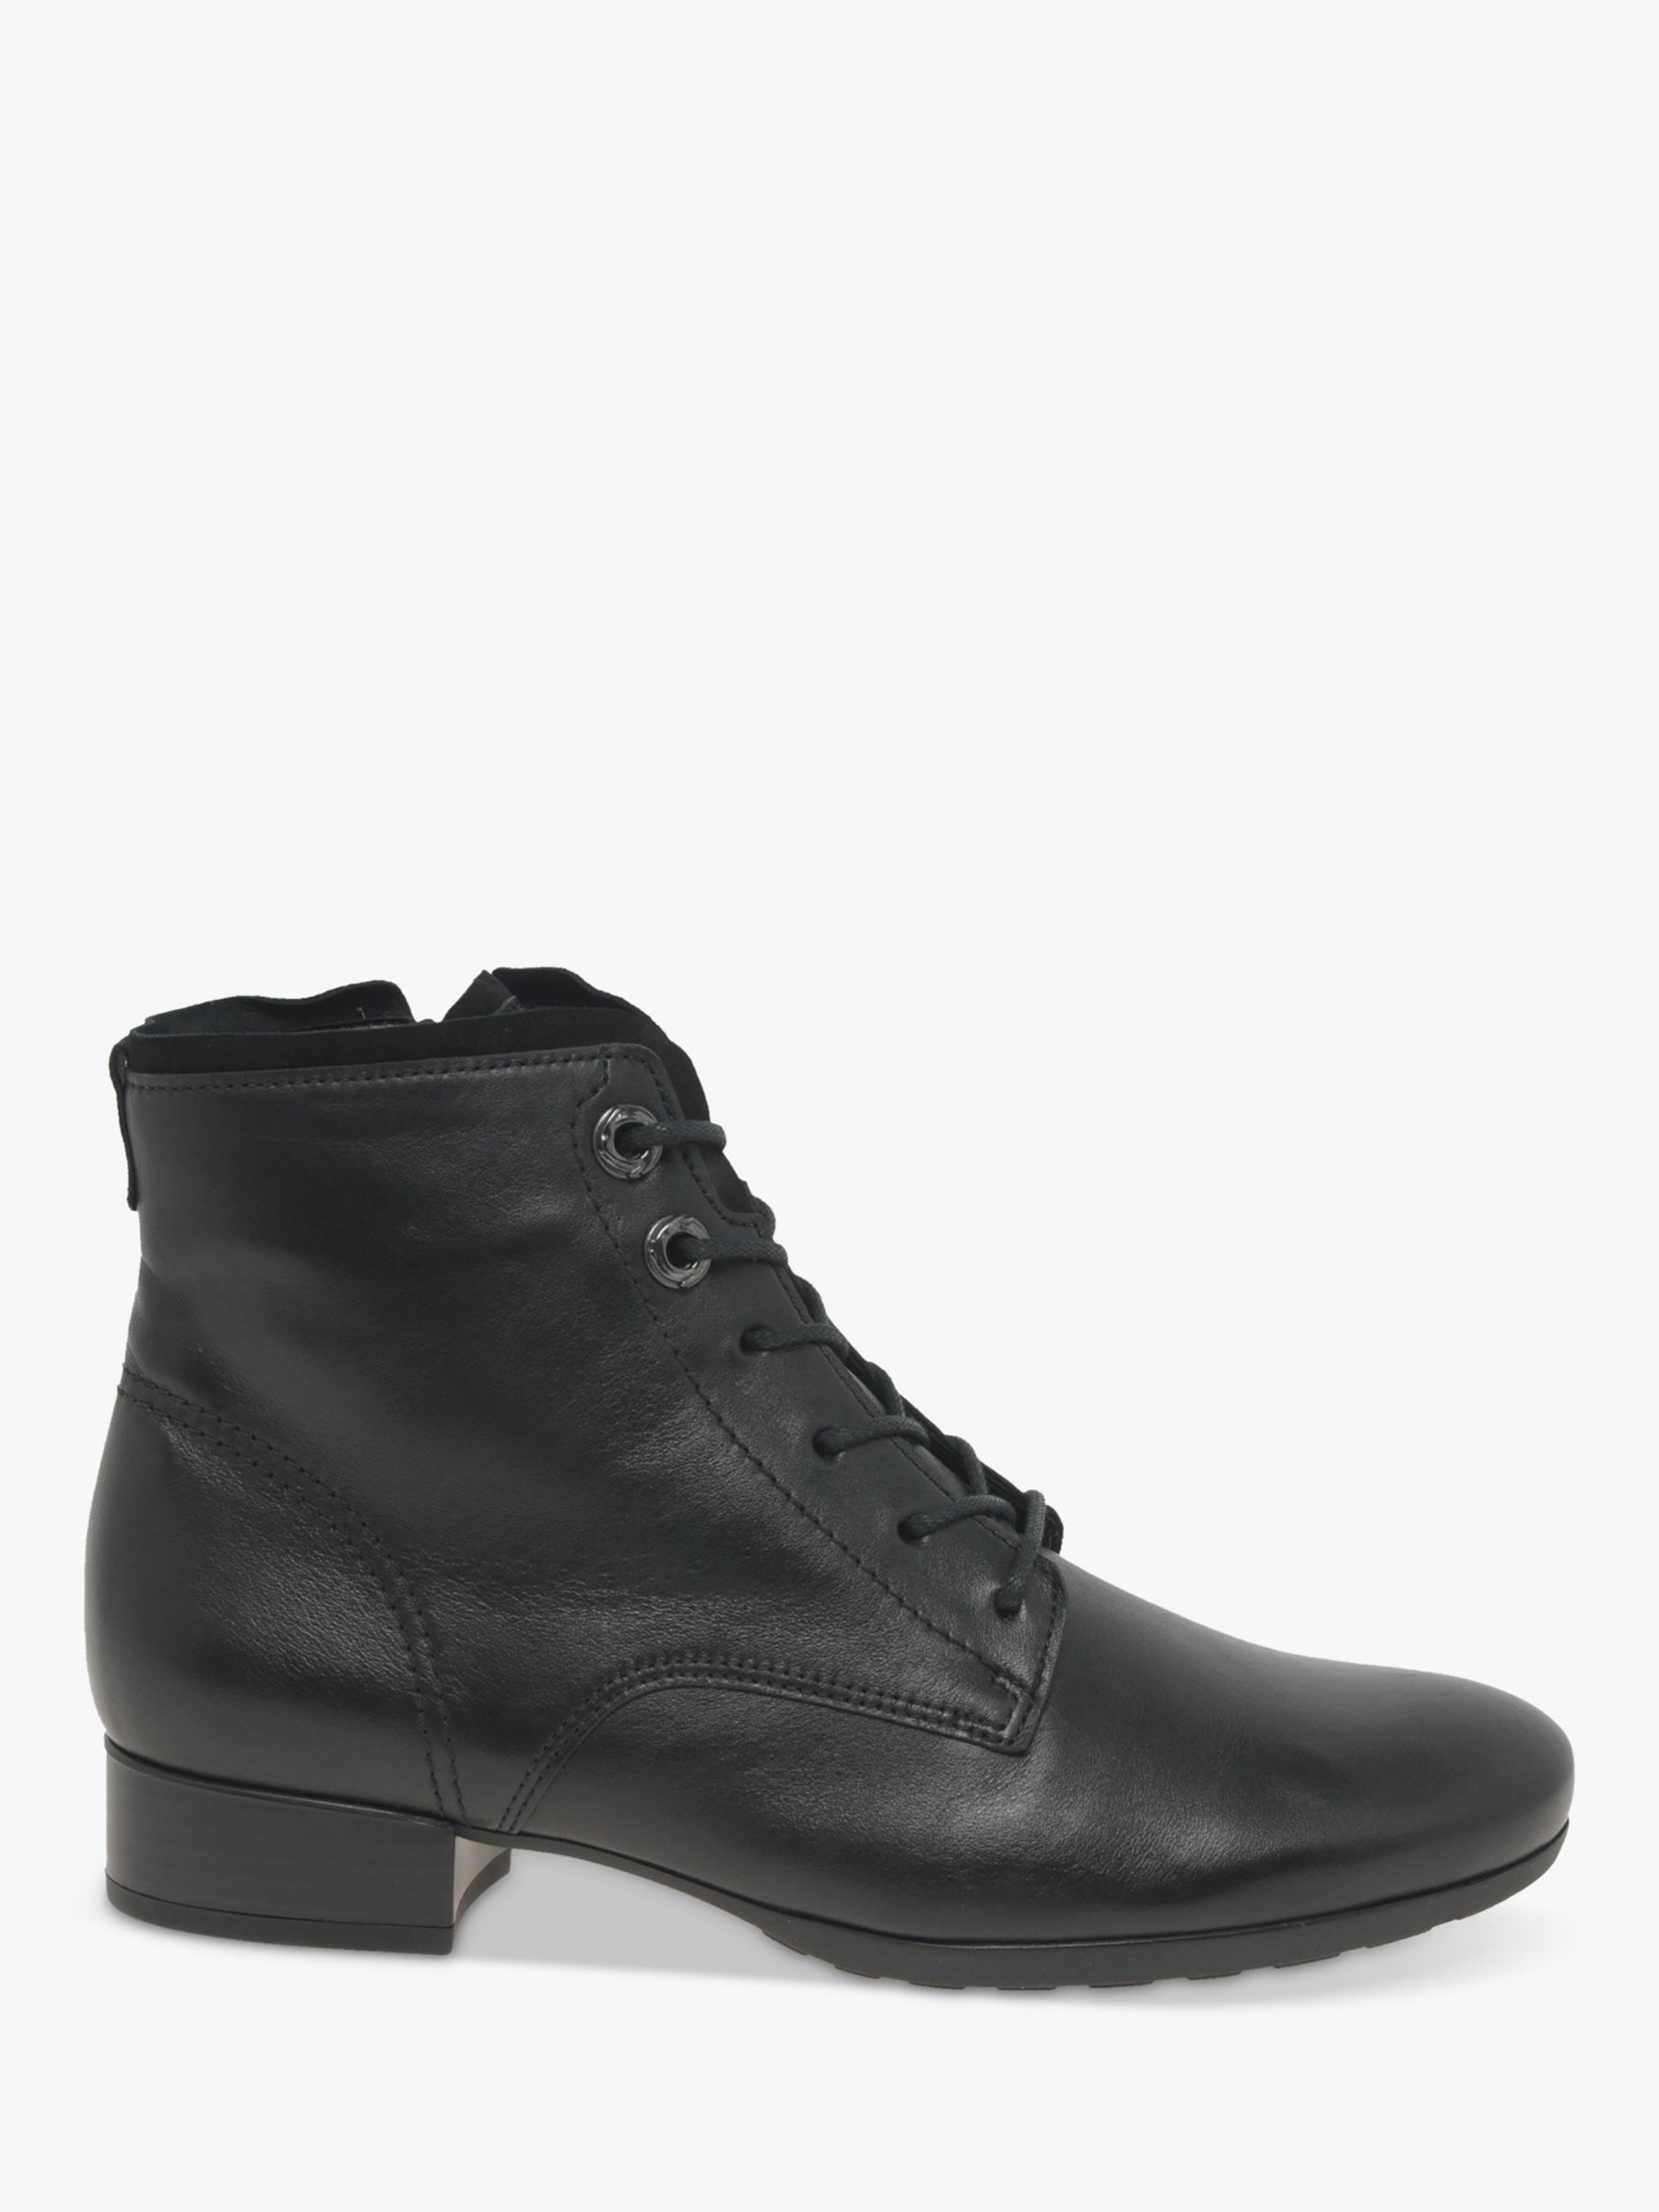 Boat Wide Fit Leather Ankle Boots, at Lewis & Partners